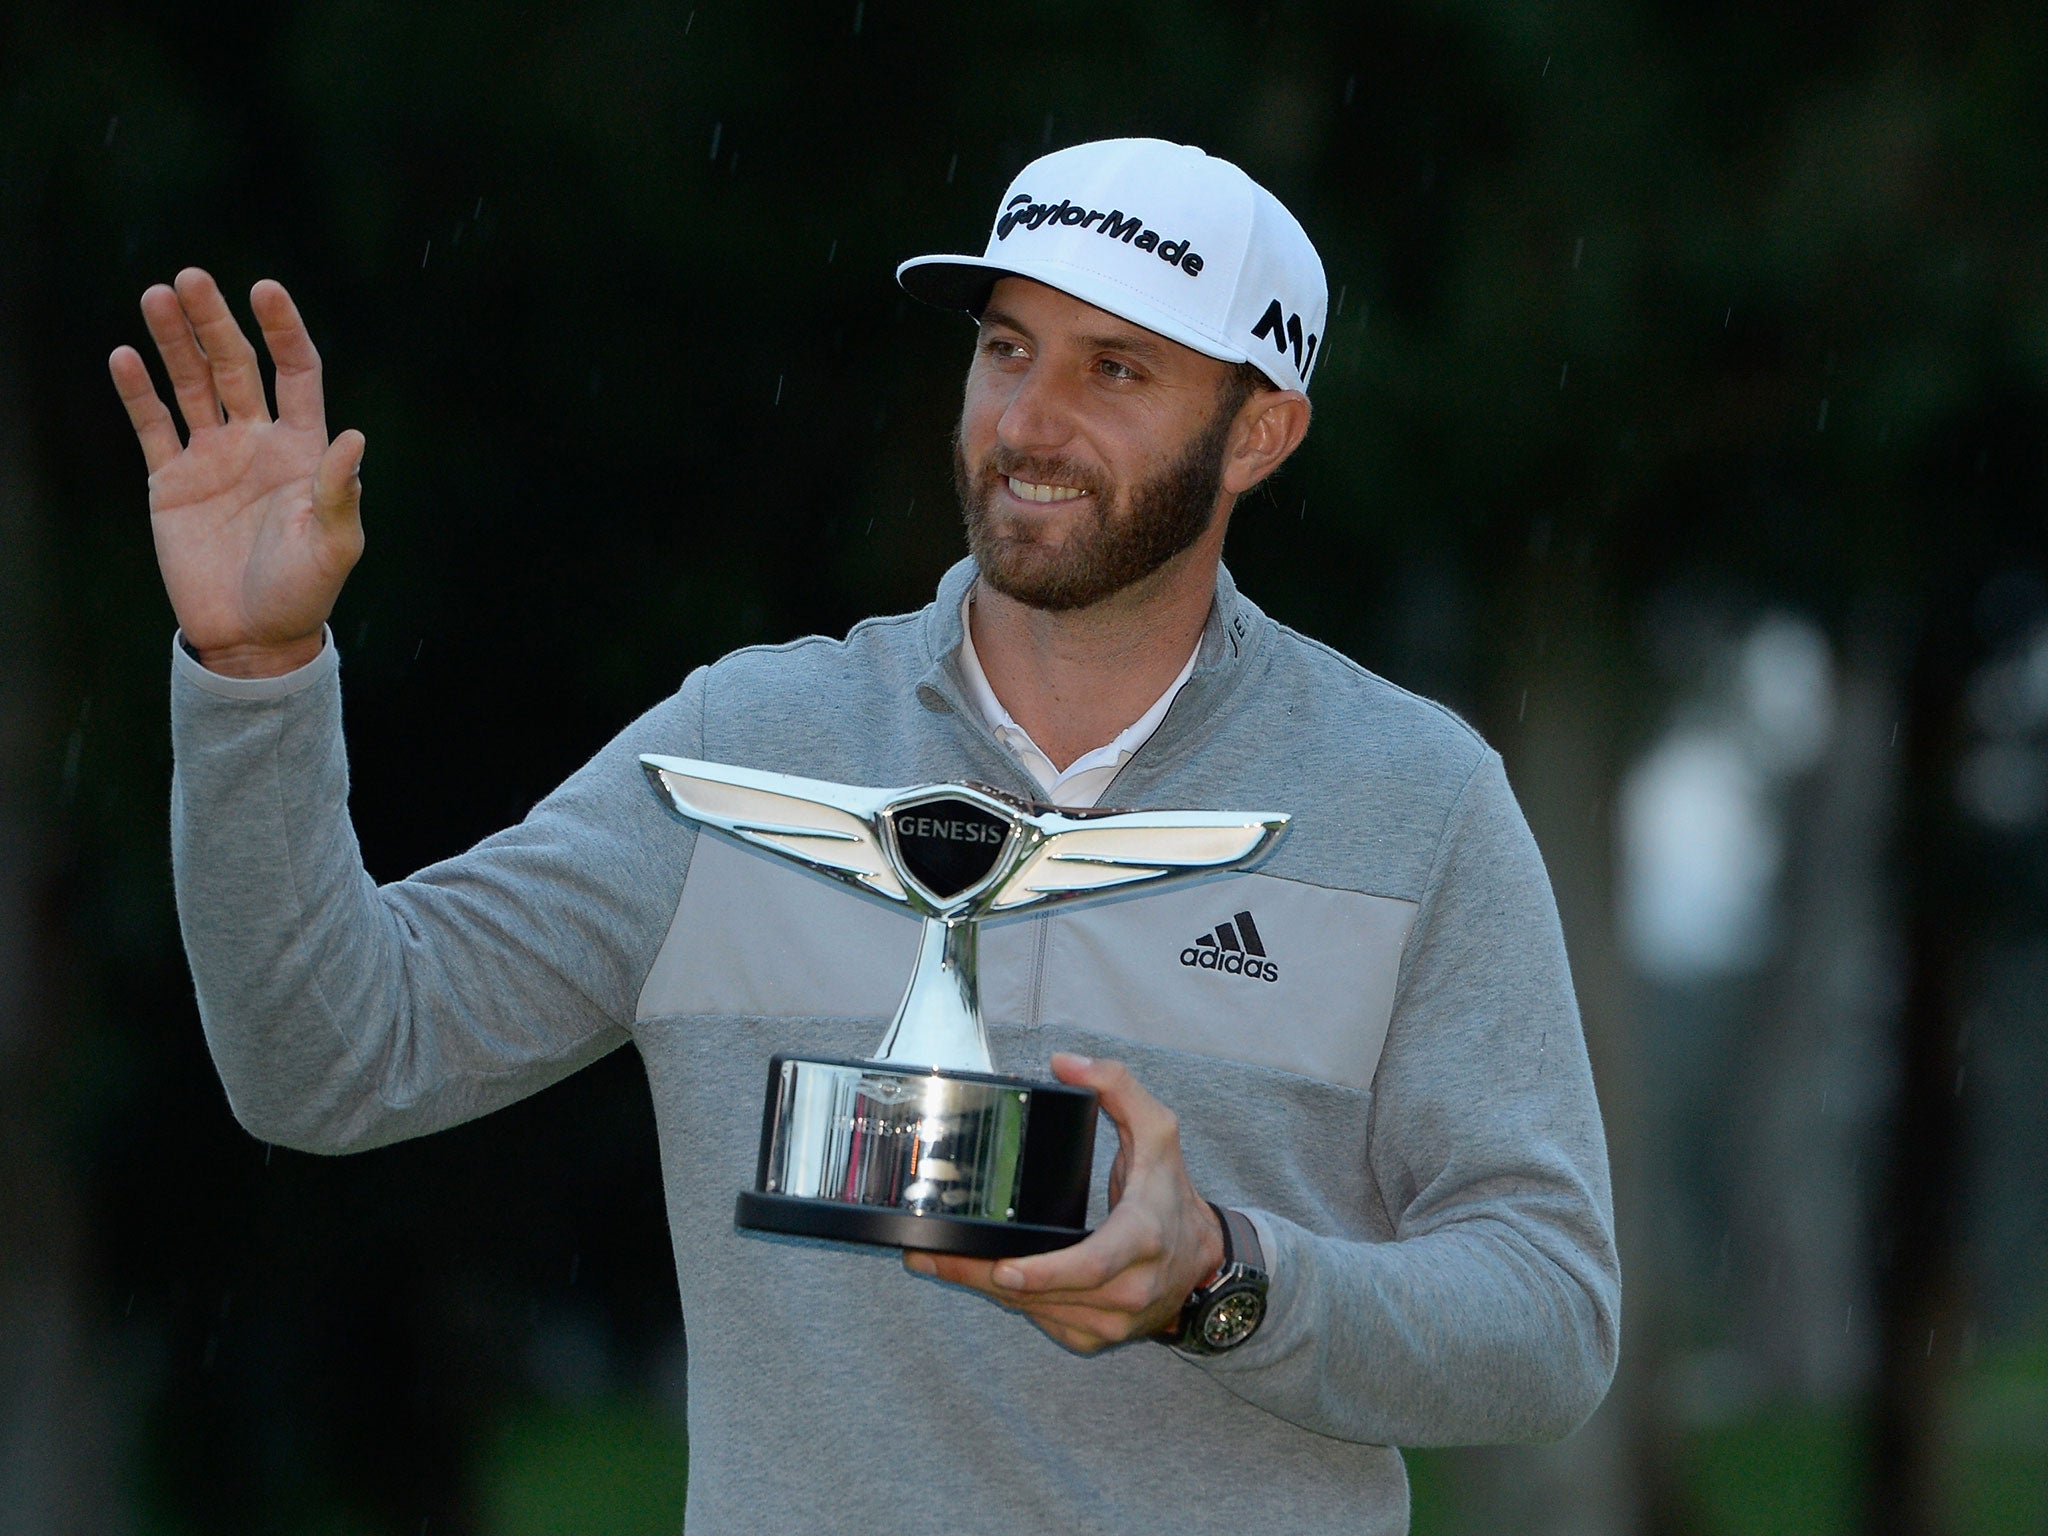 Dustin Johnson is the new world No 1 after his dominant victory at the Genesis Open